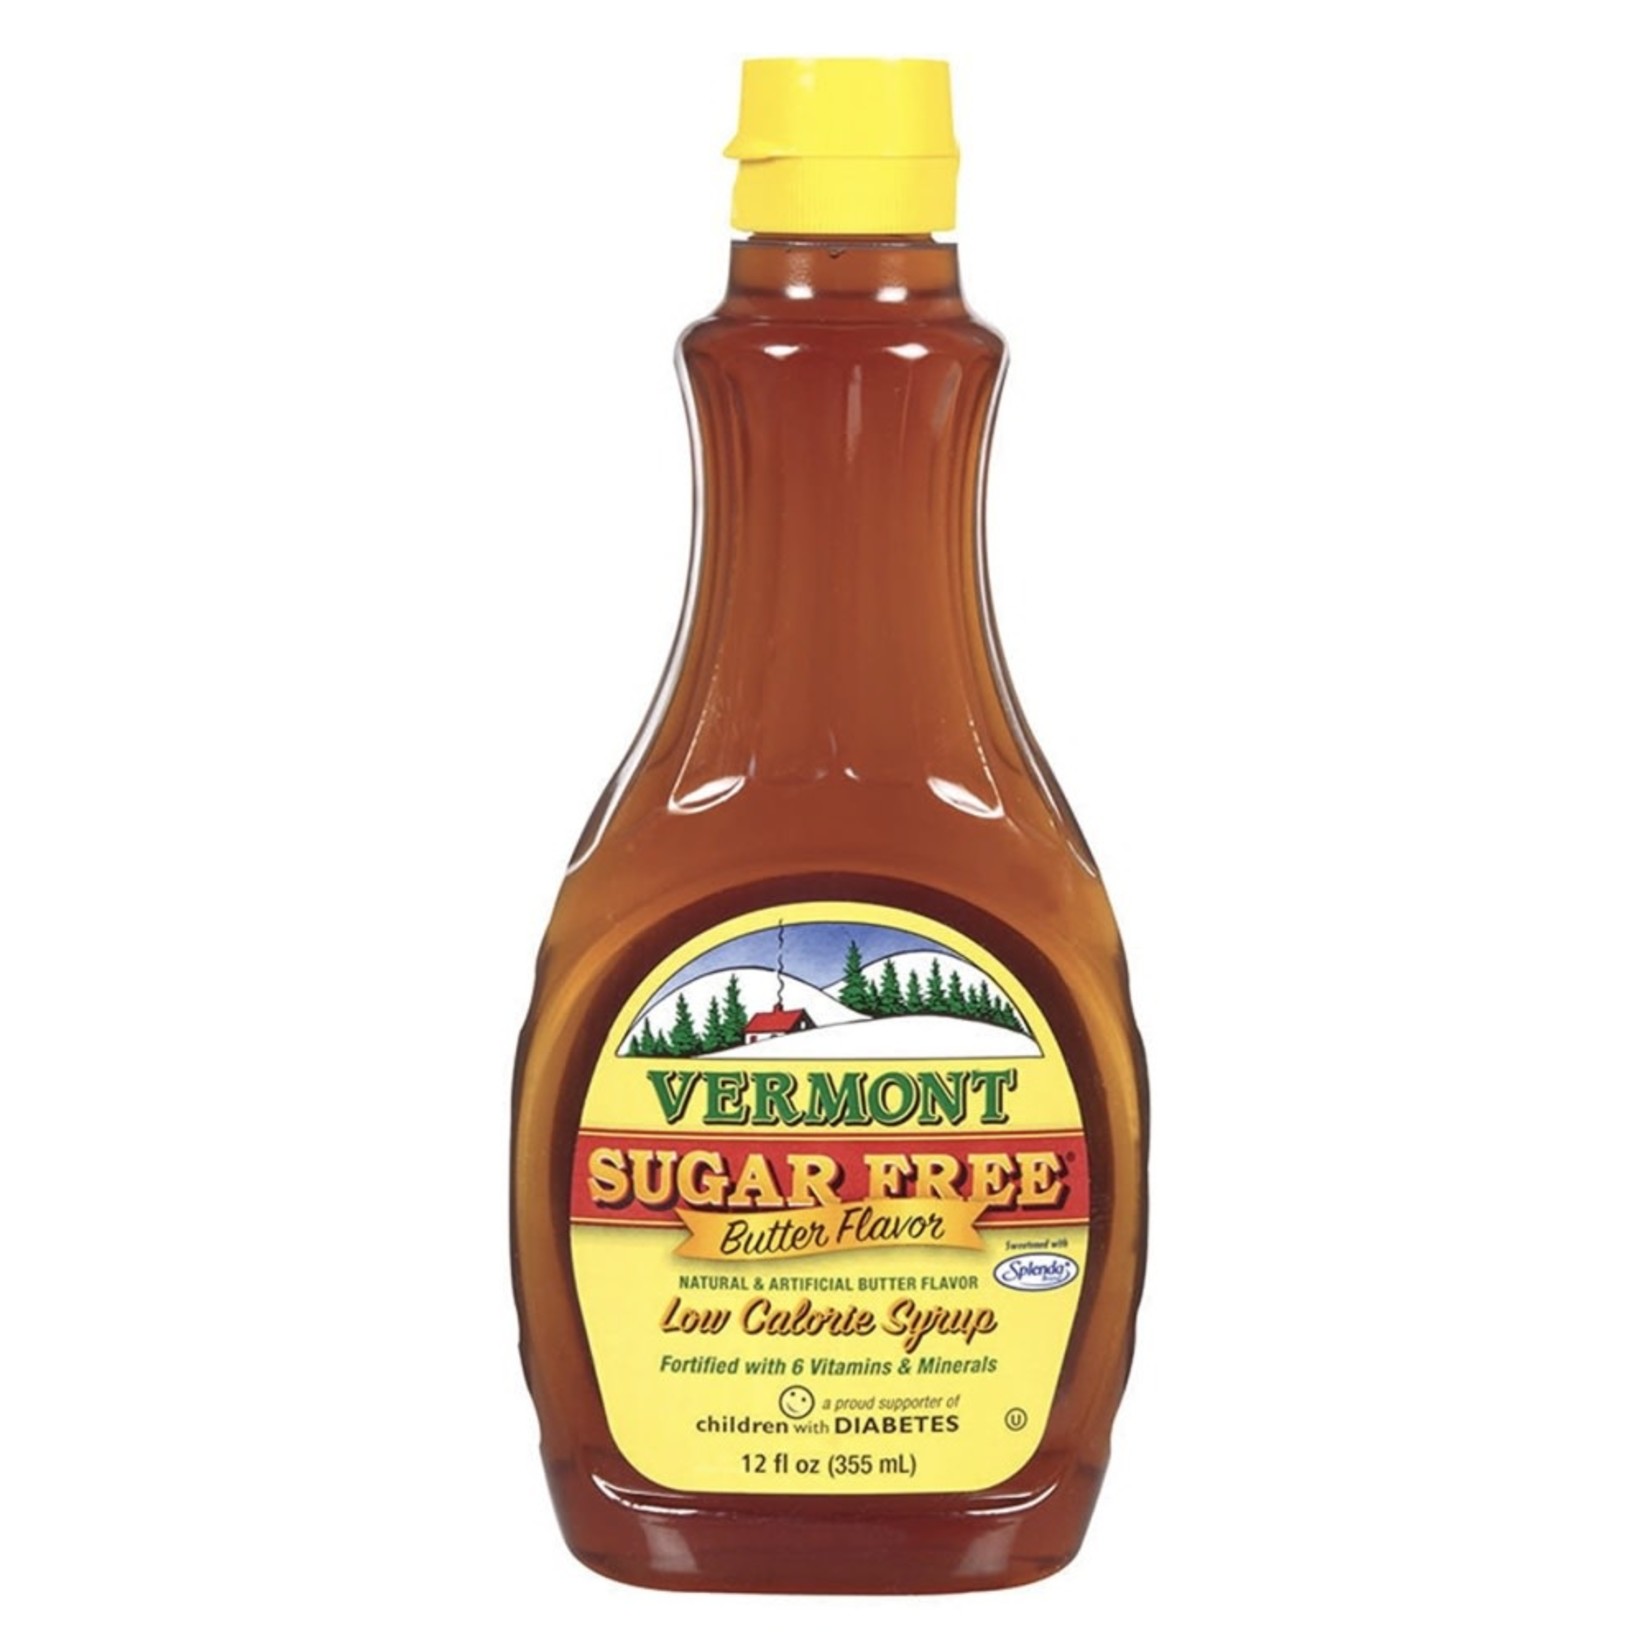 Vermont Sugar Free Vermont Sugar Free Butter Flavour Low Calorie Syrup 355ml